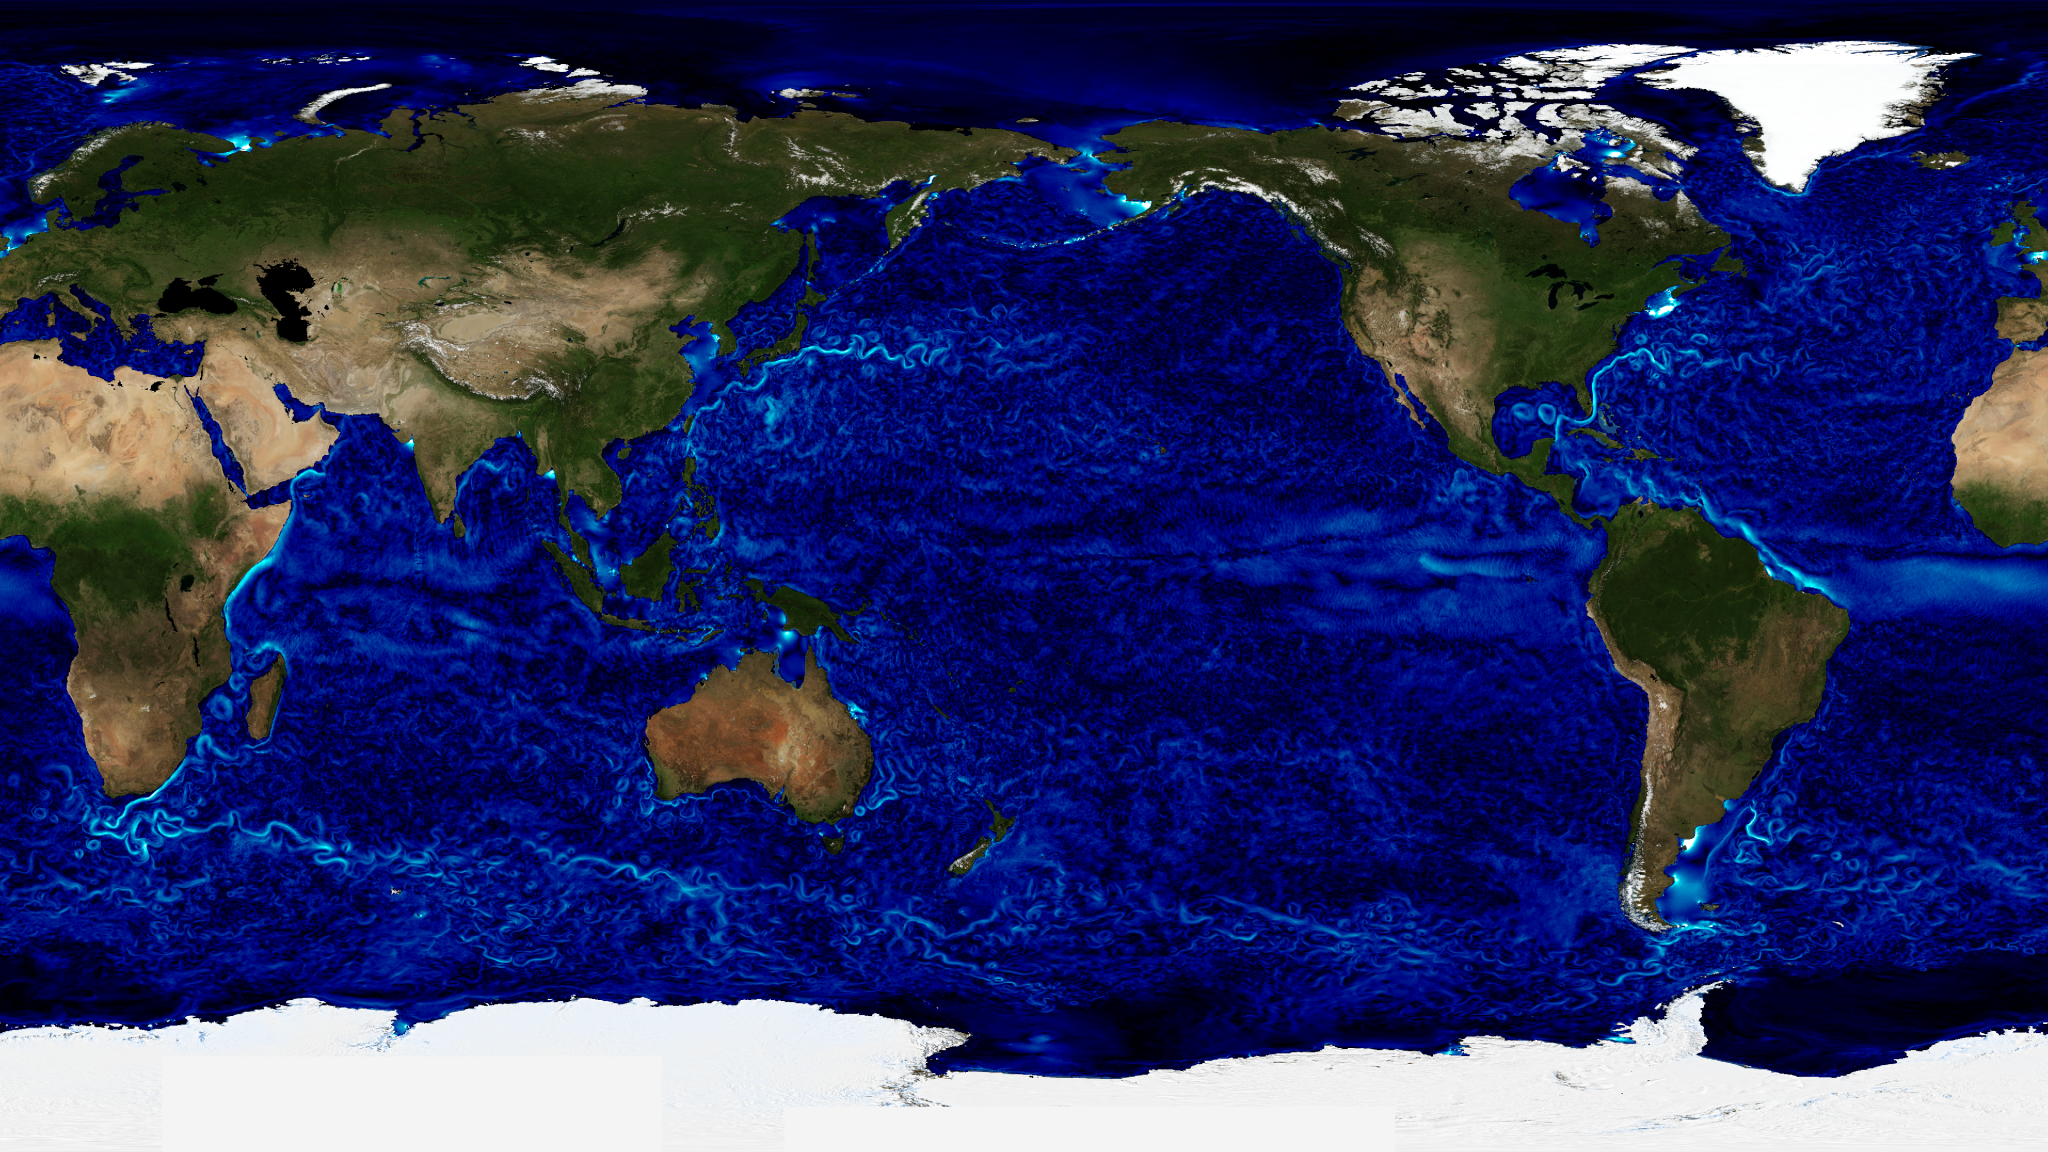 Snapshot of a simulation showing global sea surface speed and tides.